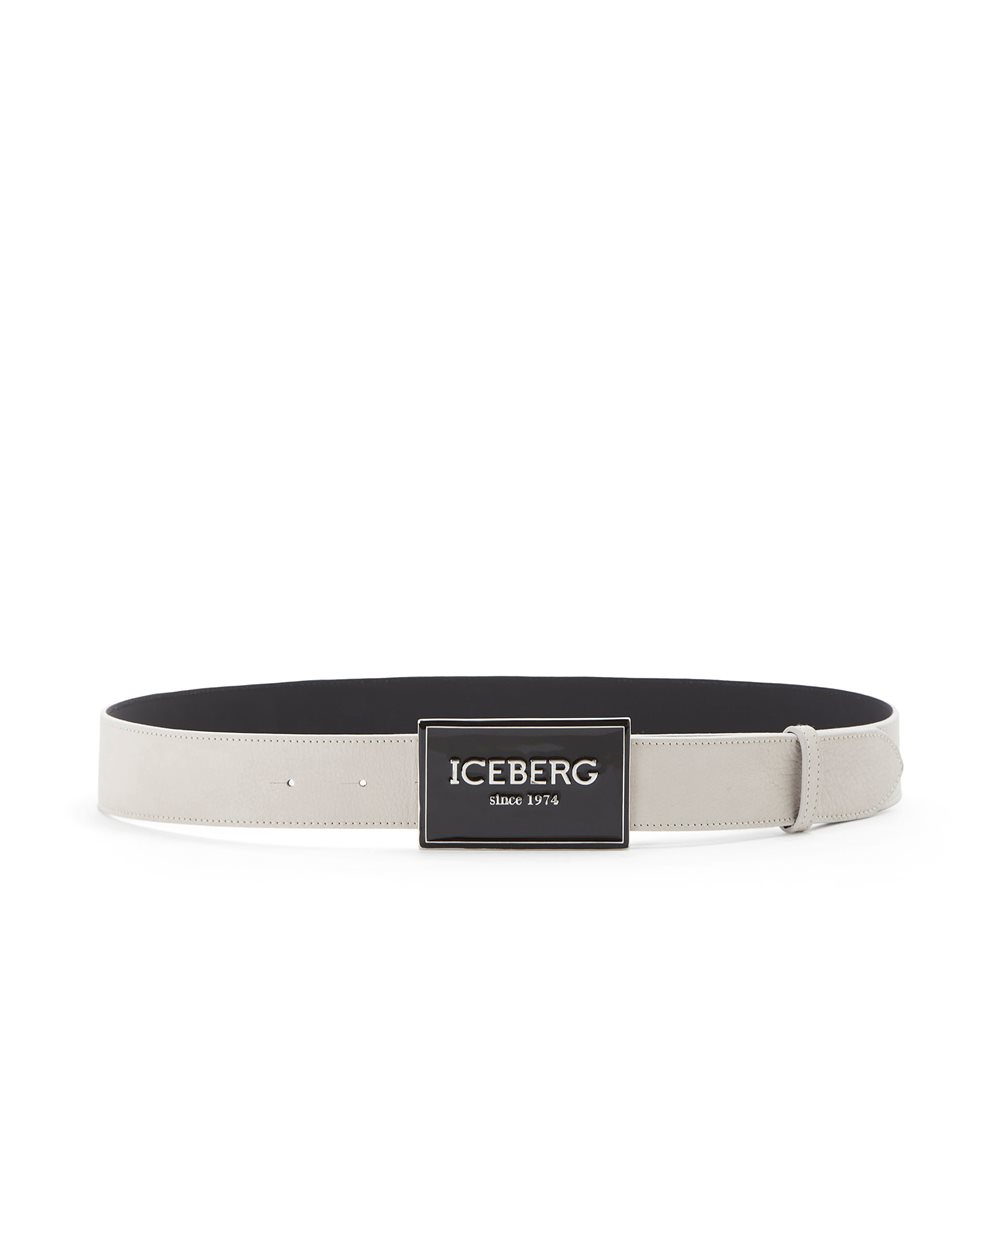 Leather belt with logo buckle - VALENTINE'S DAY GIFTS | Iceberg - Official Website